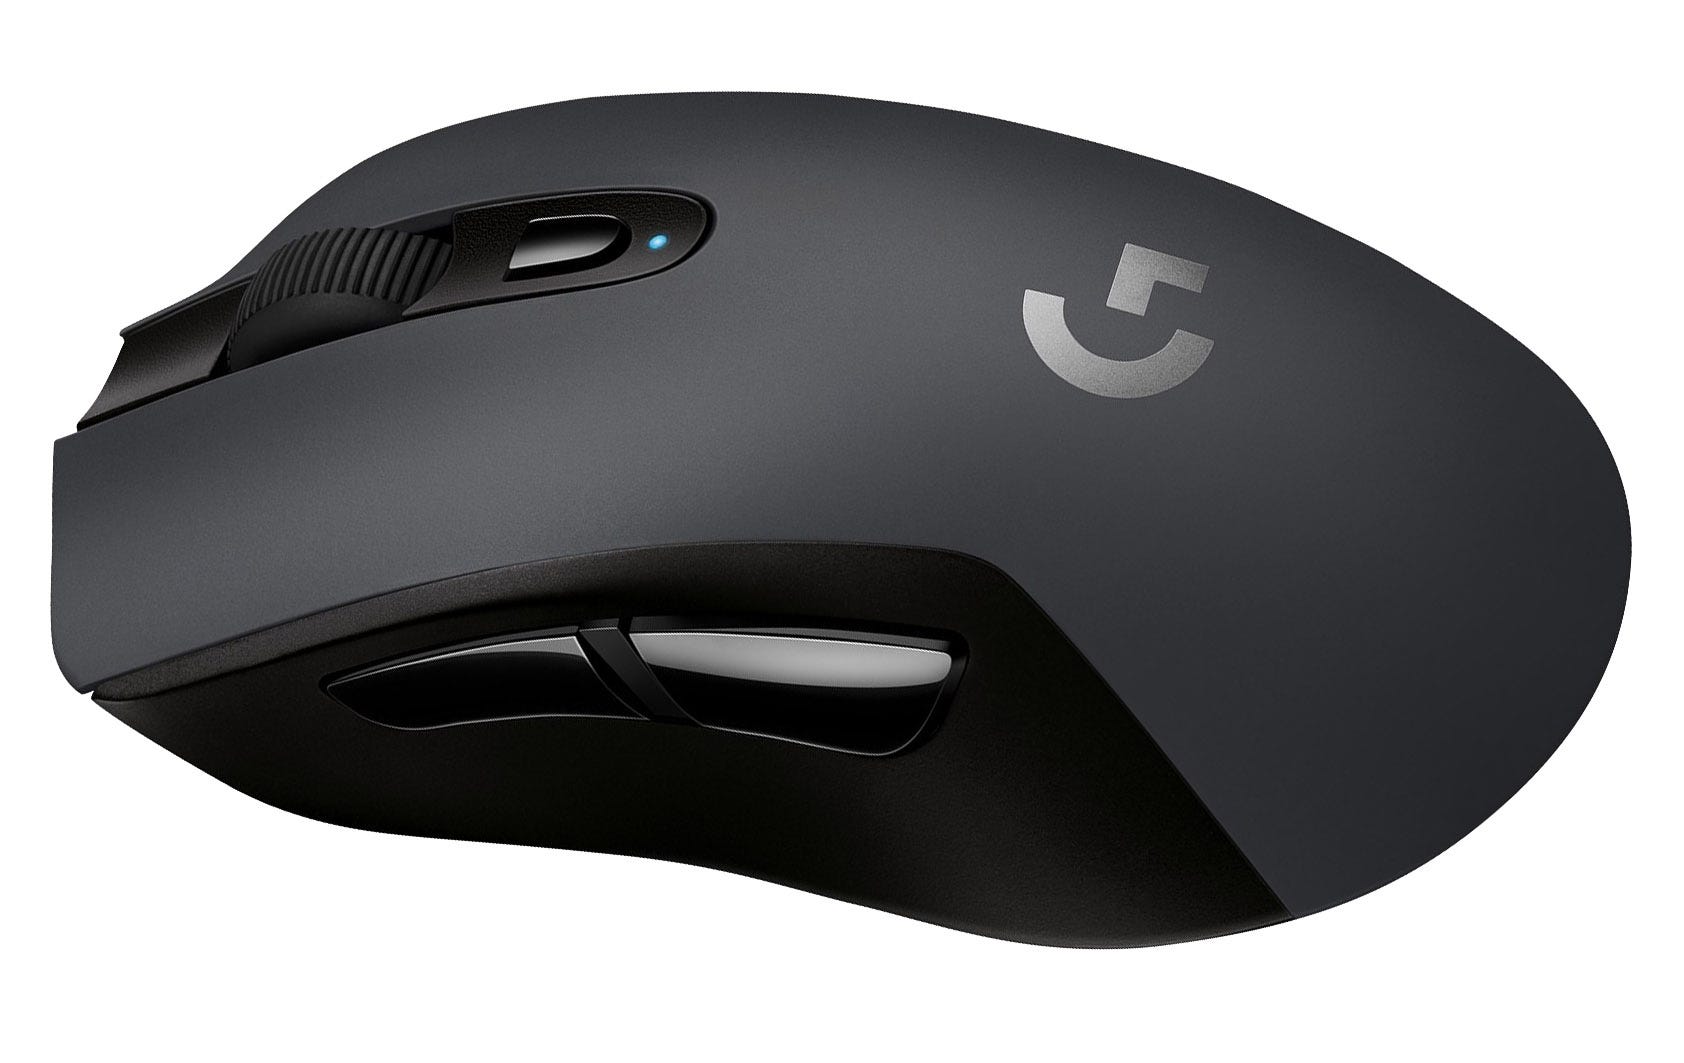 The Logitech G603 mouse from the side.